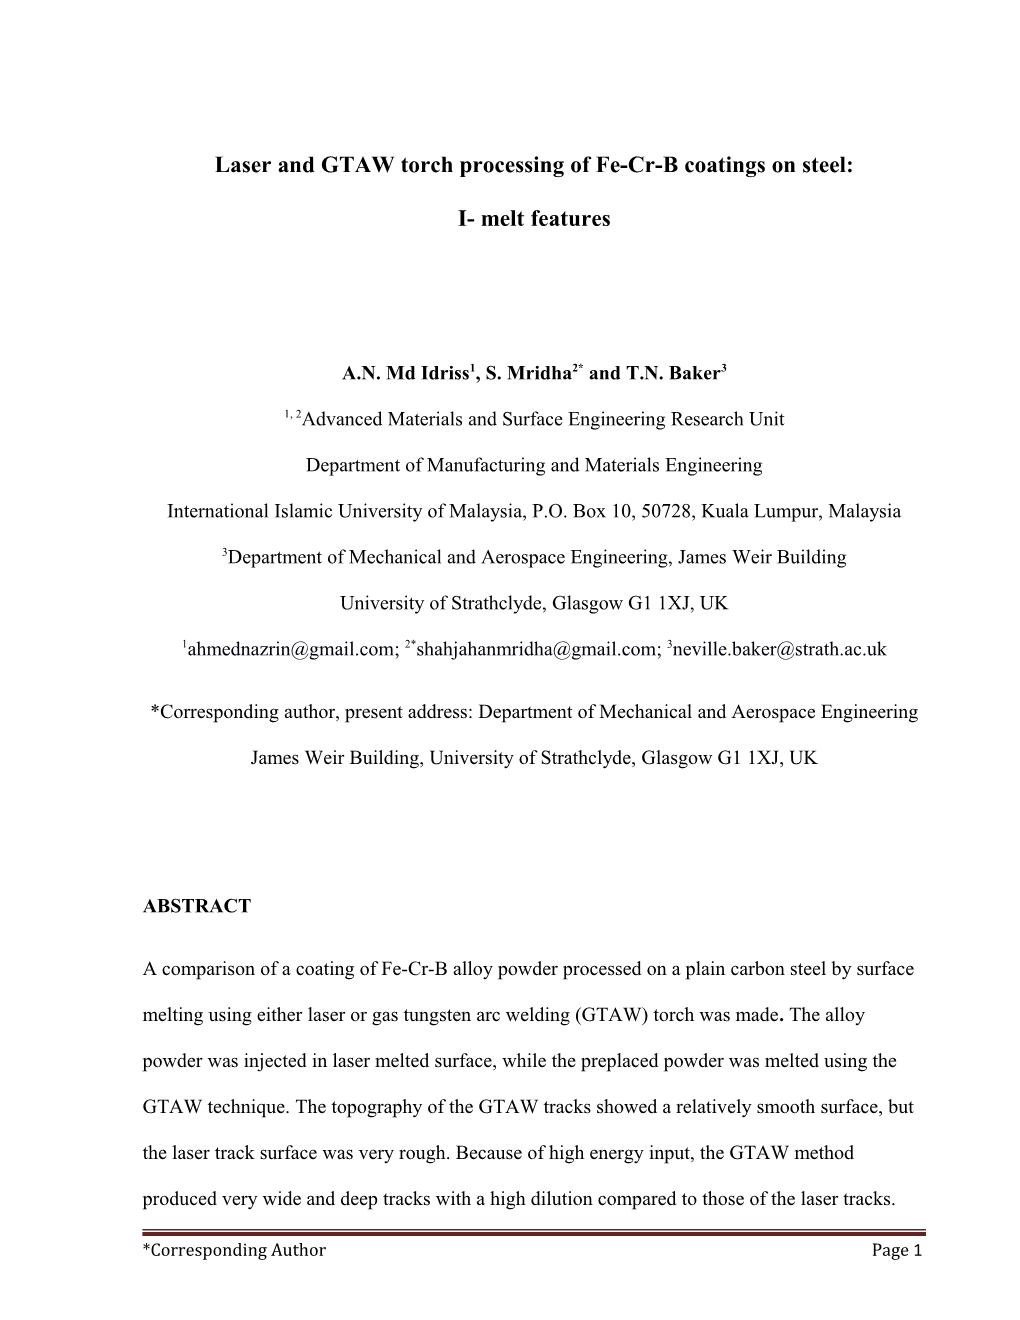 Laser and GTAW Torch Processing of Fe-Cr-B Coatings on Steel